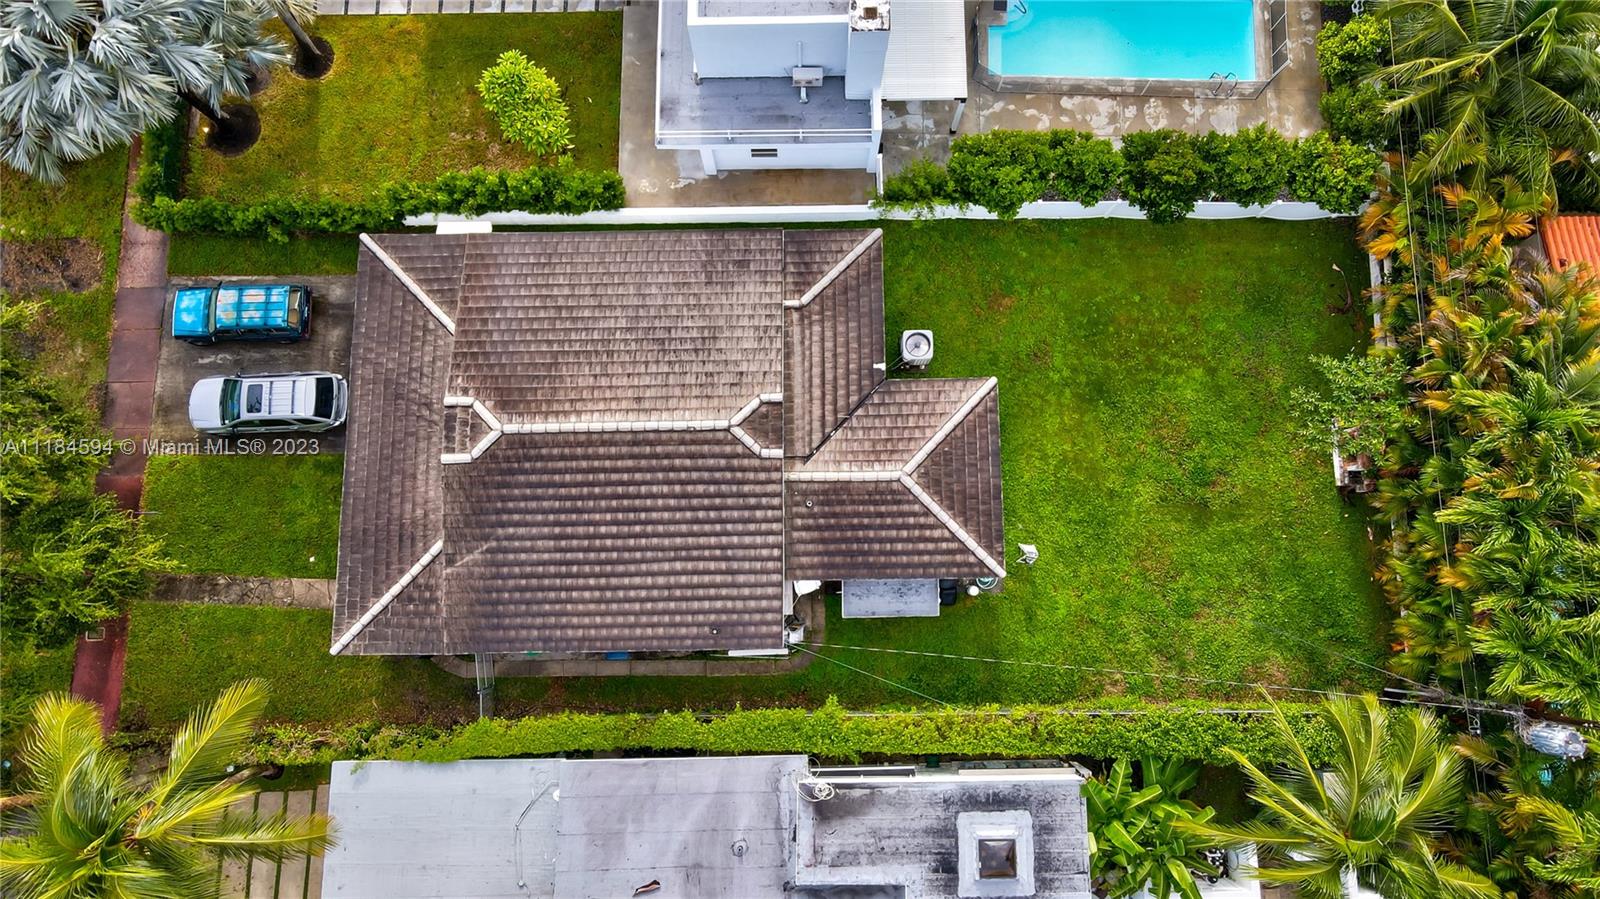 a aerial view of a house with garden space and lake view